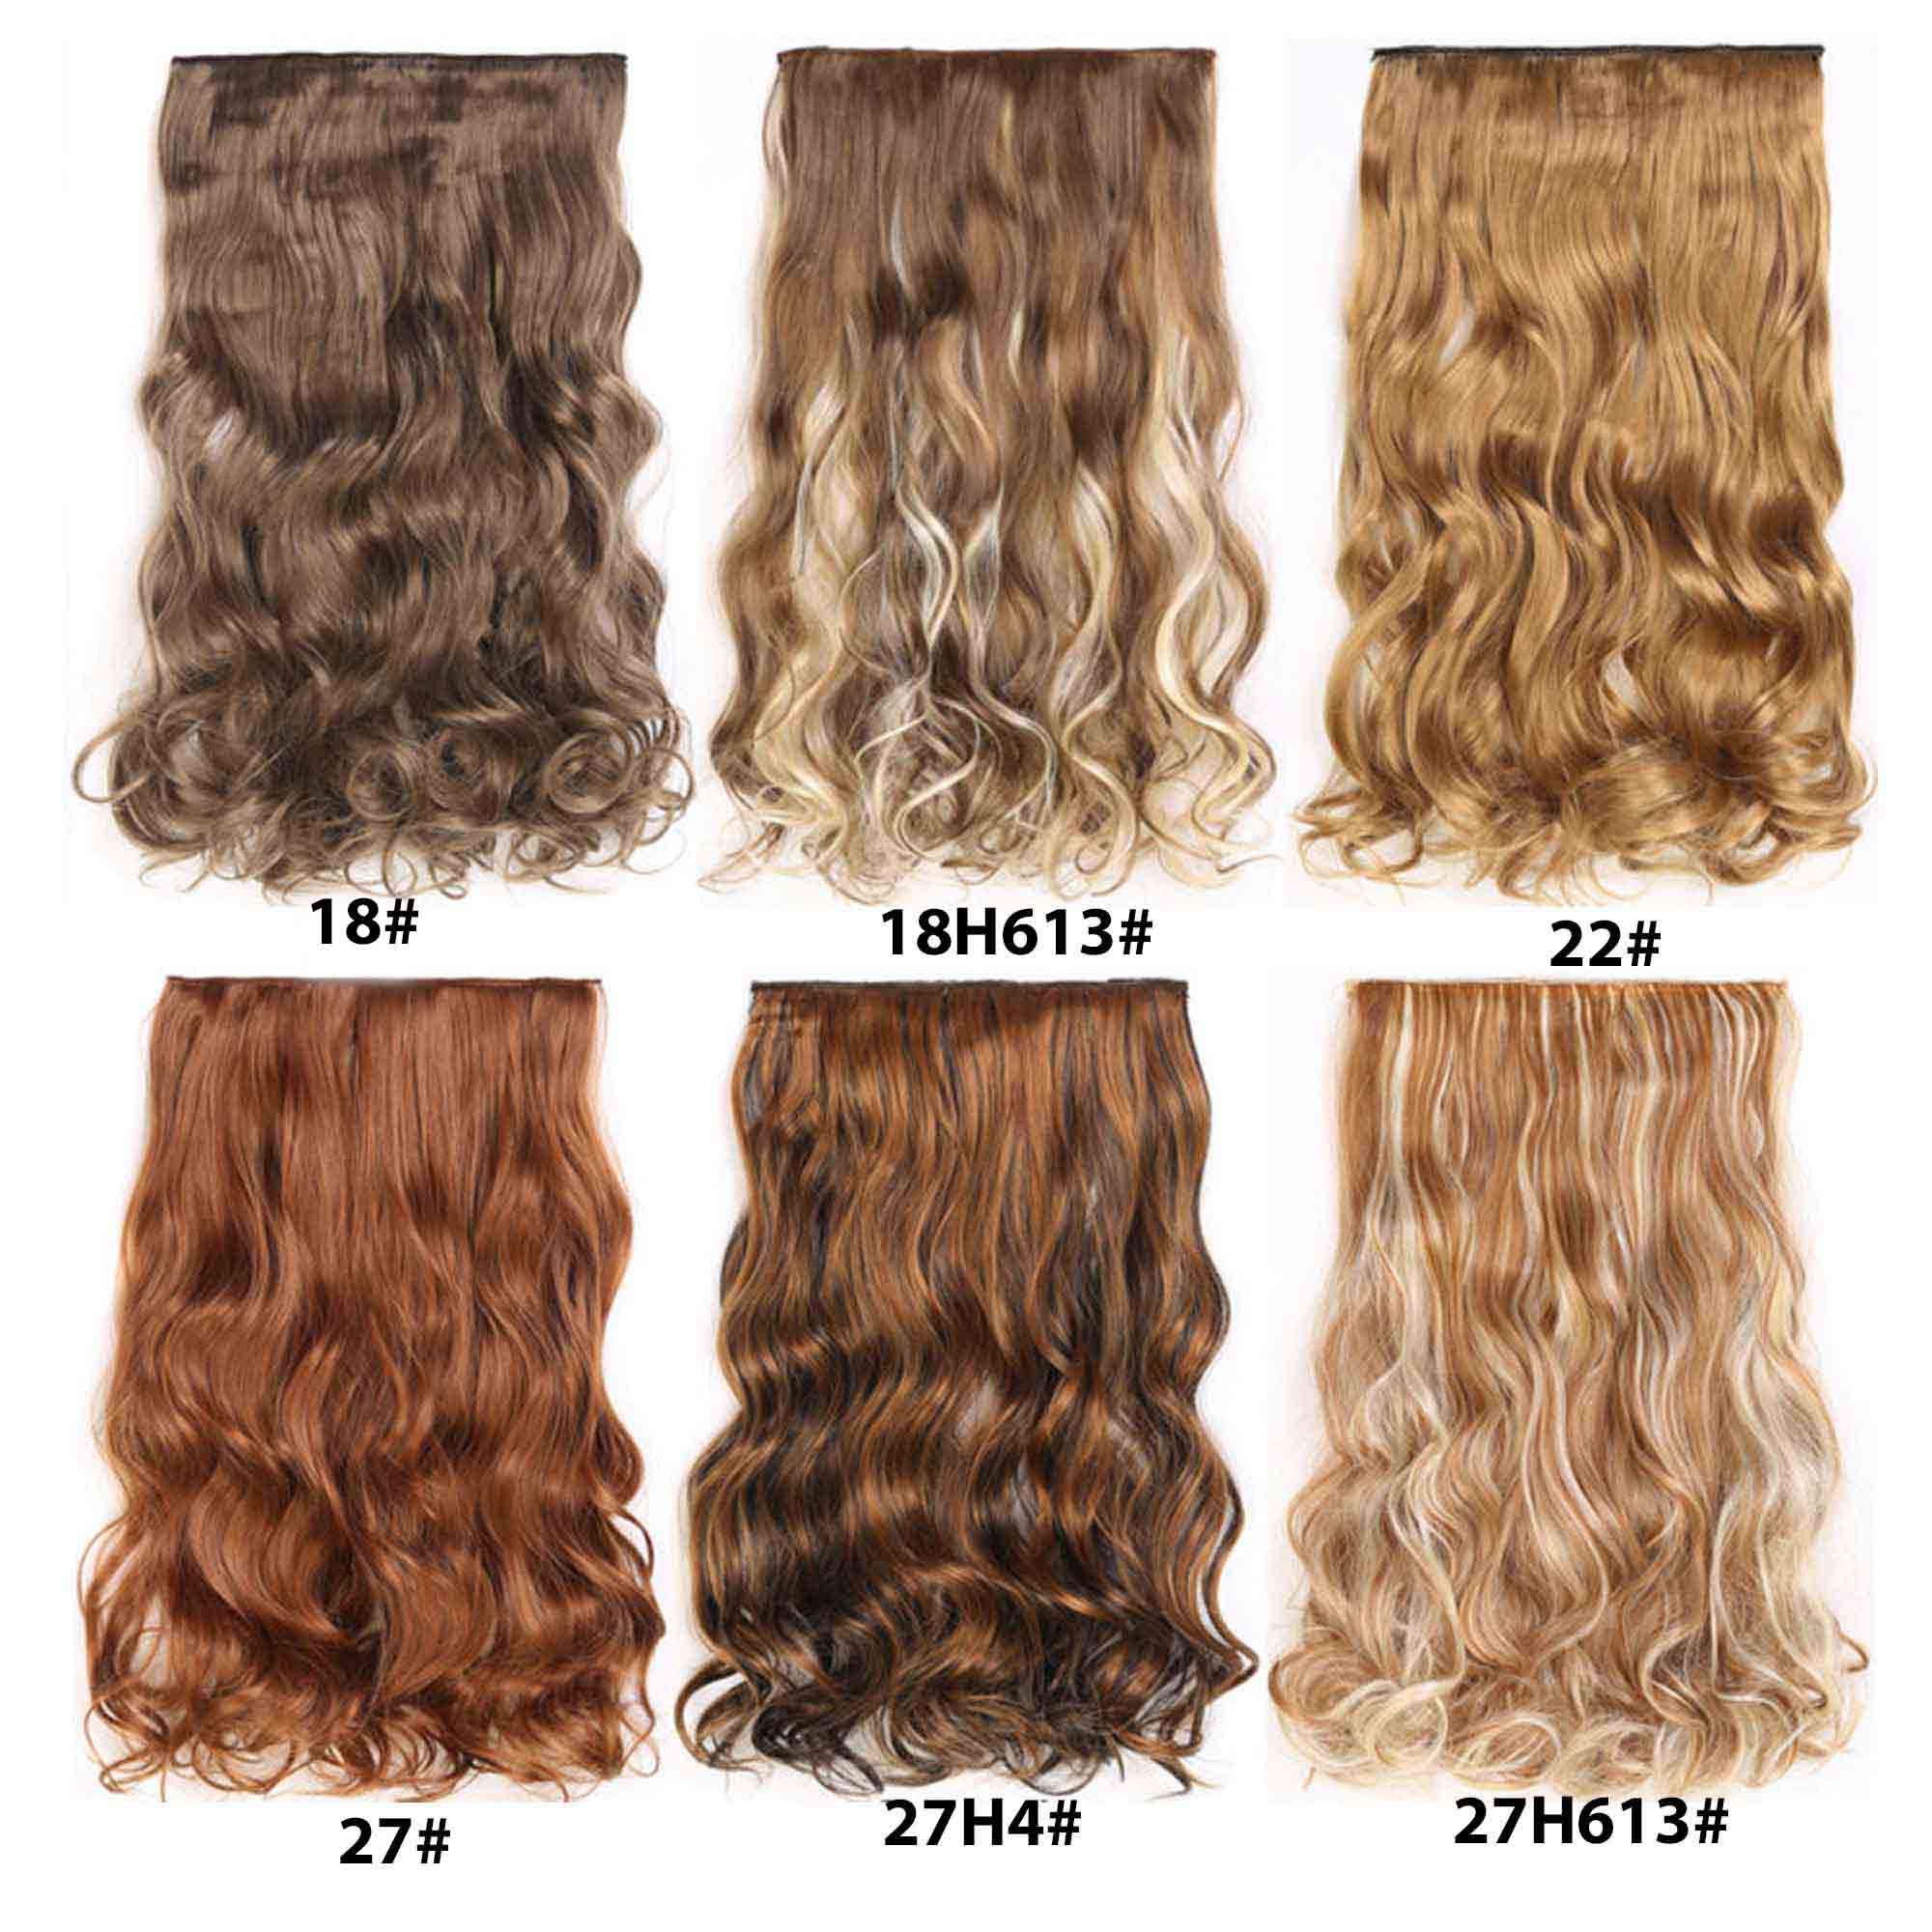 zak alcohol deur Women Clip In 3/4 Full Head Long Curly Synthetic Hair Extensions 5 Clips  24" – nevermindyrhead